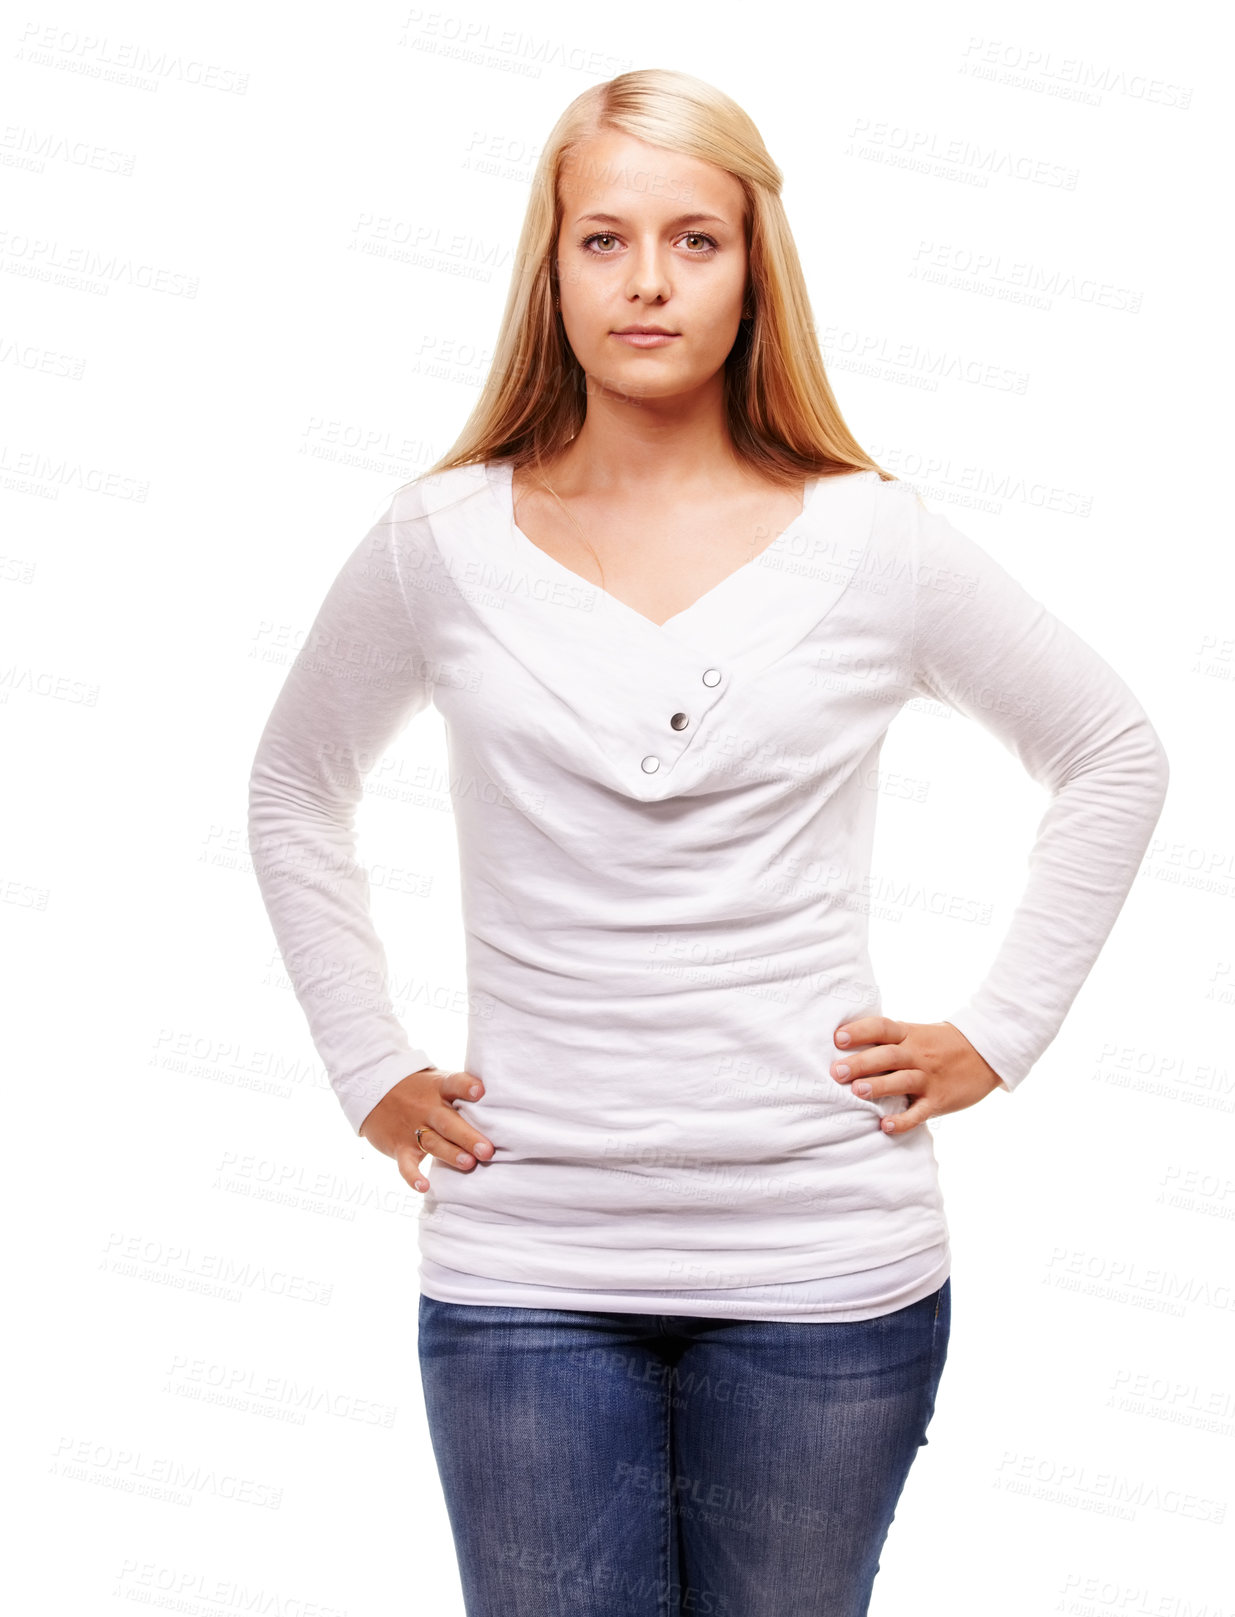 Buy stock photo Studio shot of an all-natural woman isolated on white